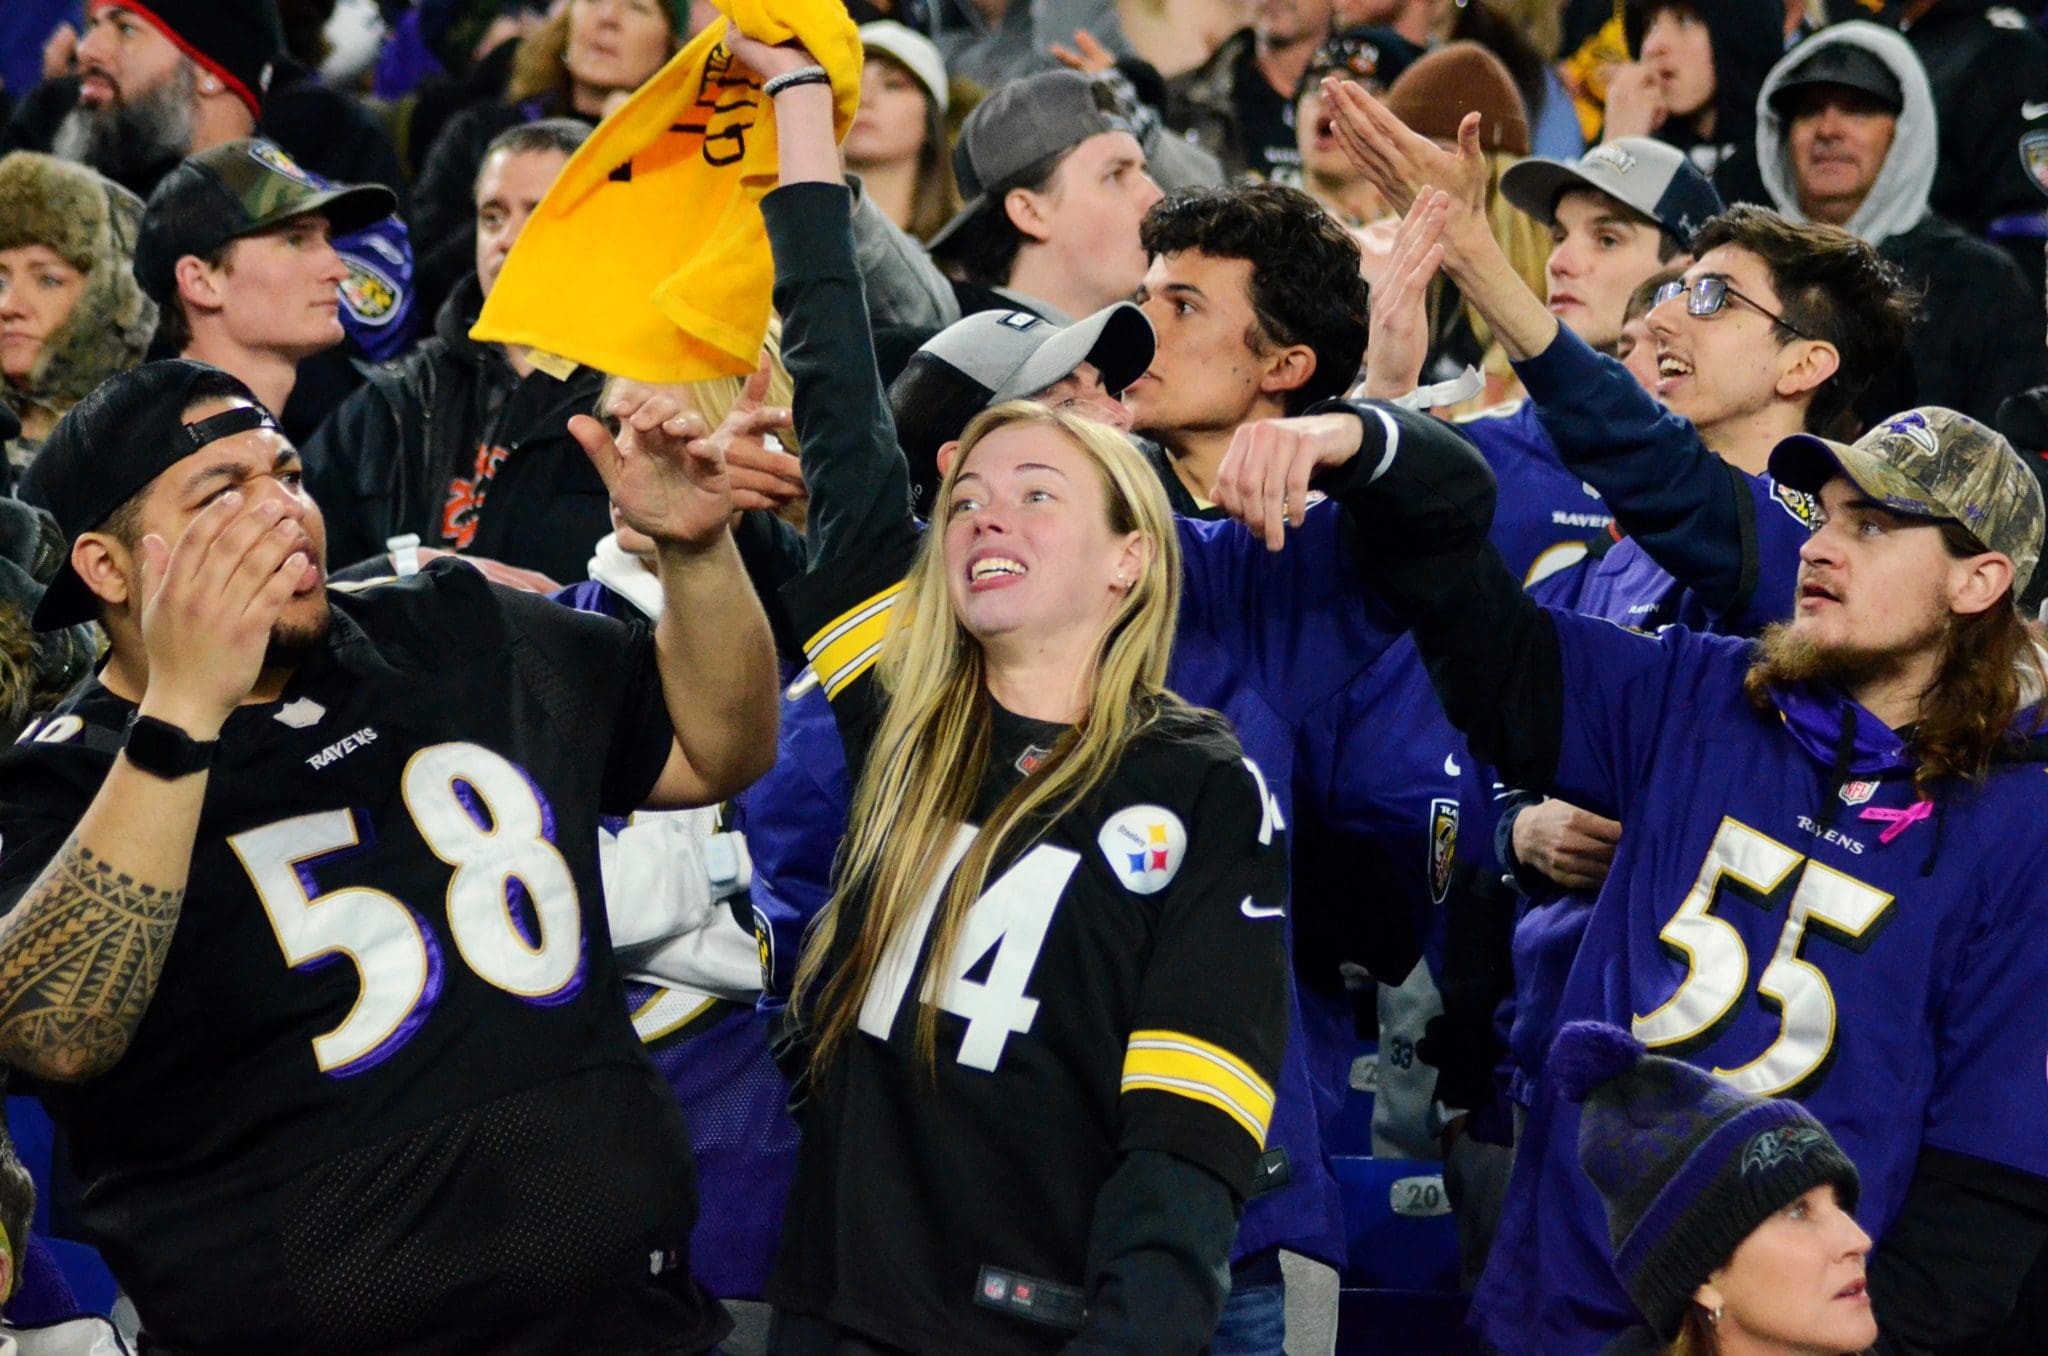 Fans celebrate as the Steelers face the Ravens on Jan. 1, 2022 in Baltimore. (Mitchell Northam / Steelers Now)